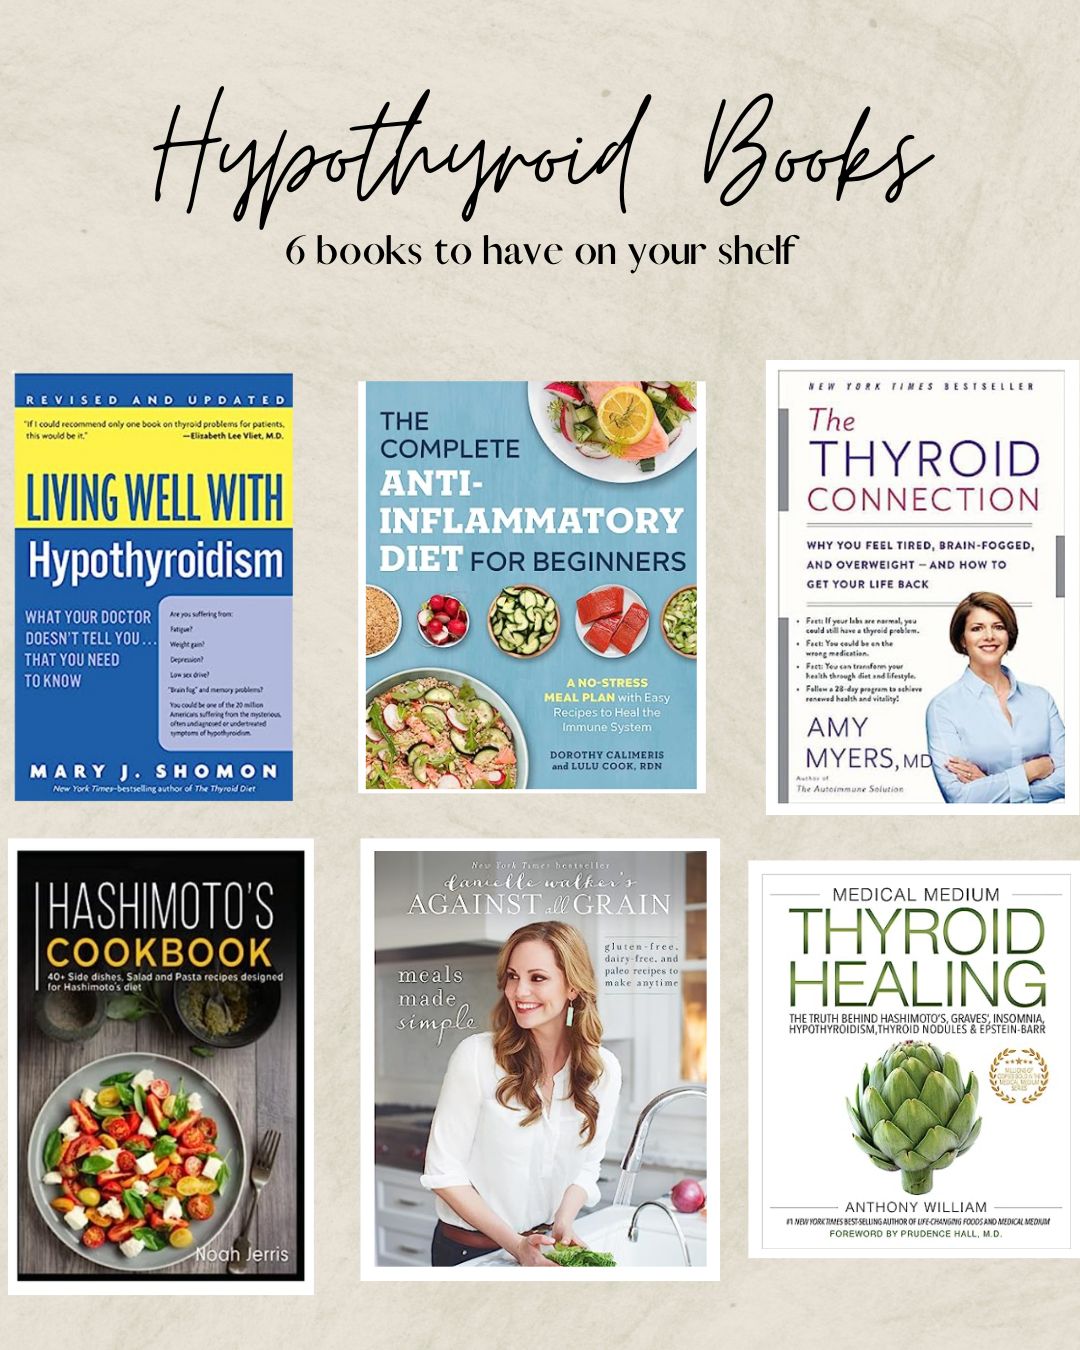 Hypothyroid Books - 6 books to have on your shelf